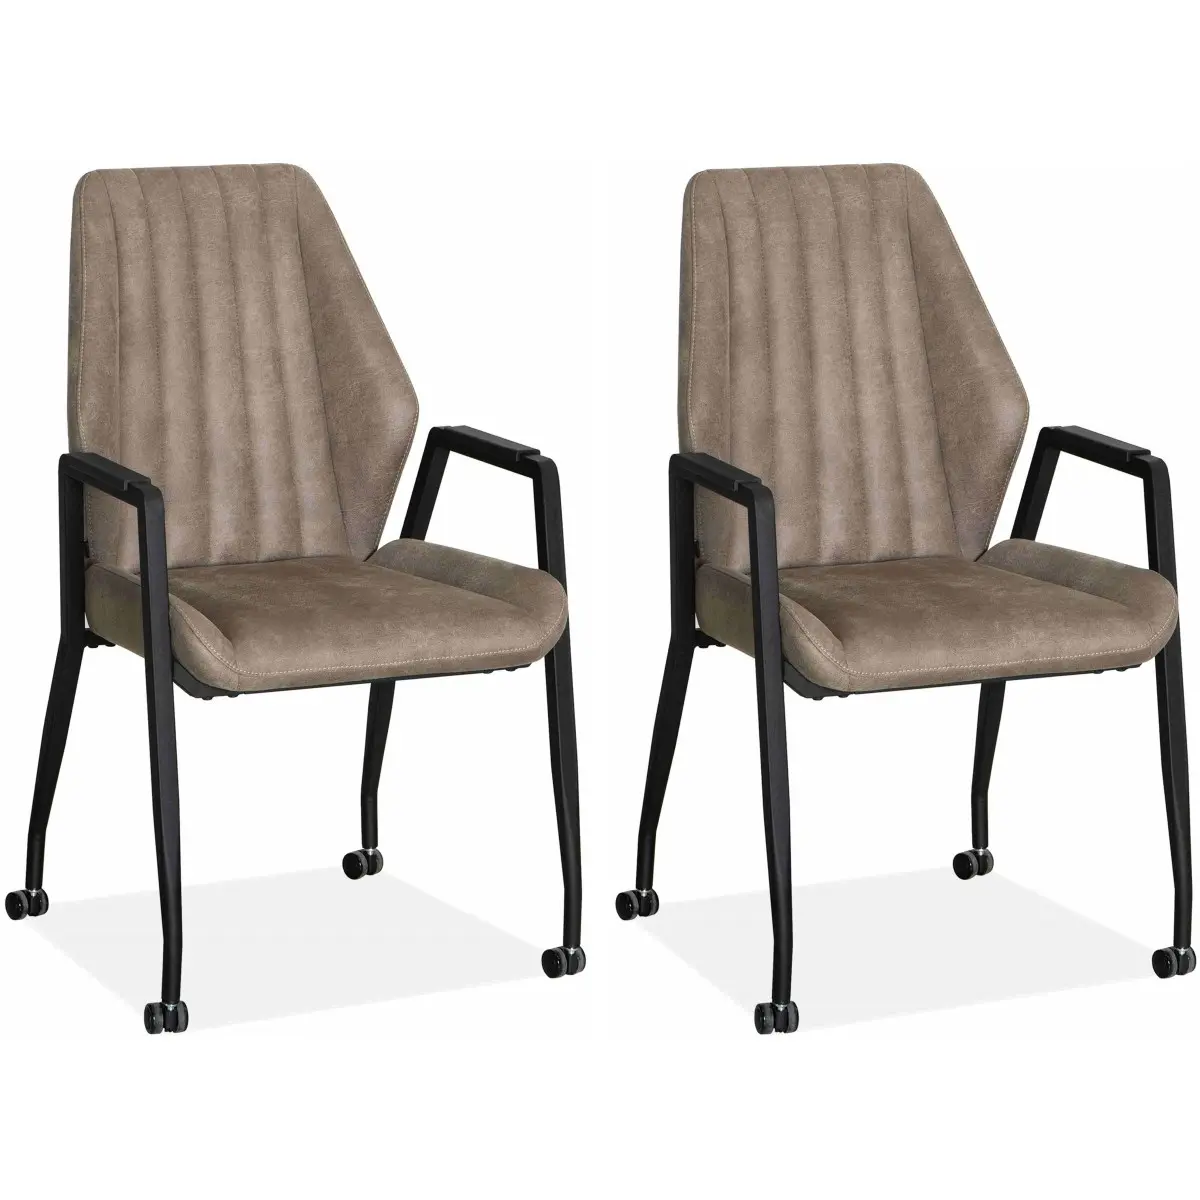 Dining Room Chair Albany B2 Set Of 2